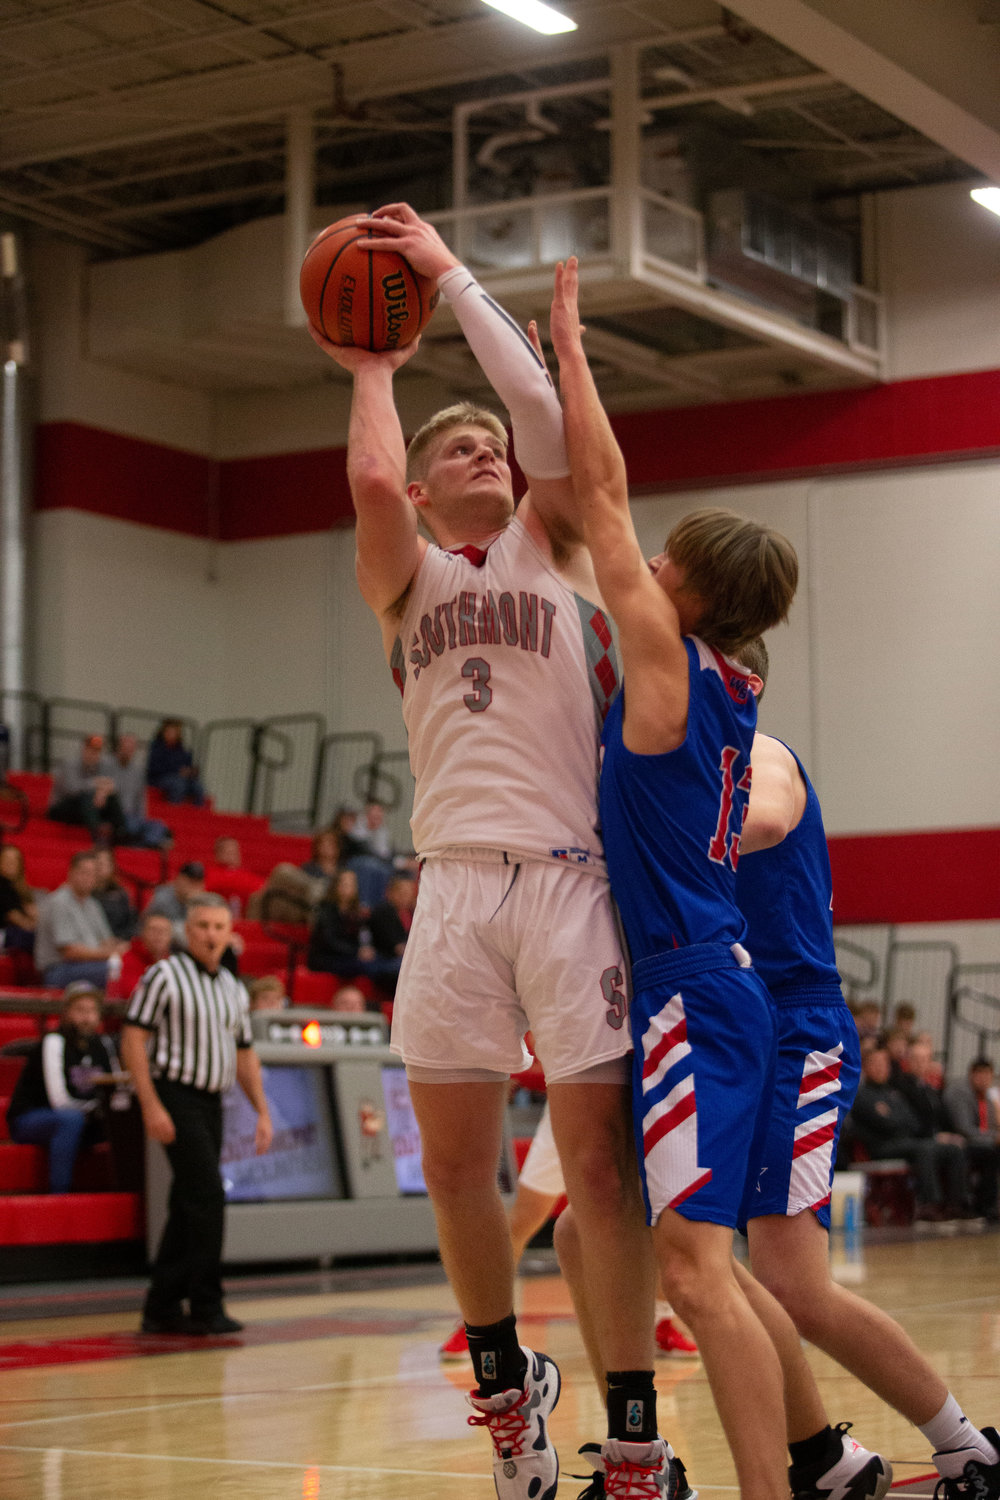 Southmont big man Carson Chadd hopes to lead the Mounties to their 3rd Sugar Creek Classic title this weekend. South gets a re-match with Western Boone in the opening game on Friday.